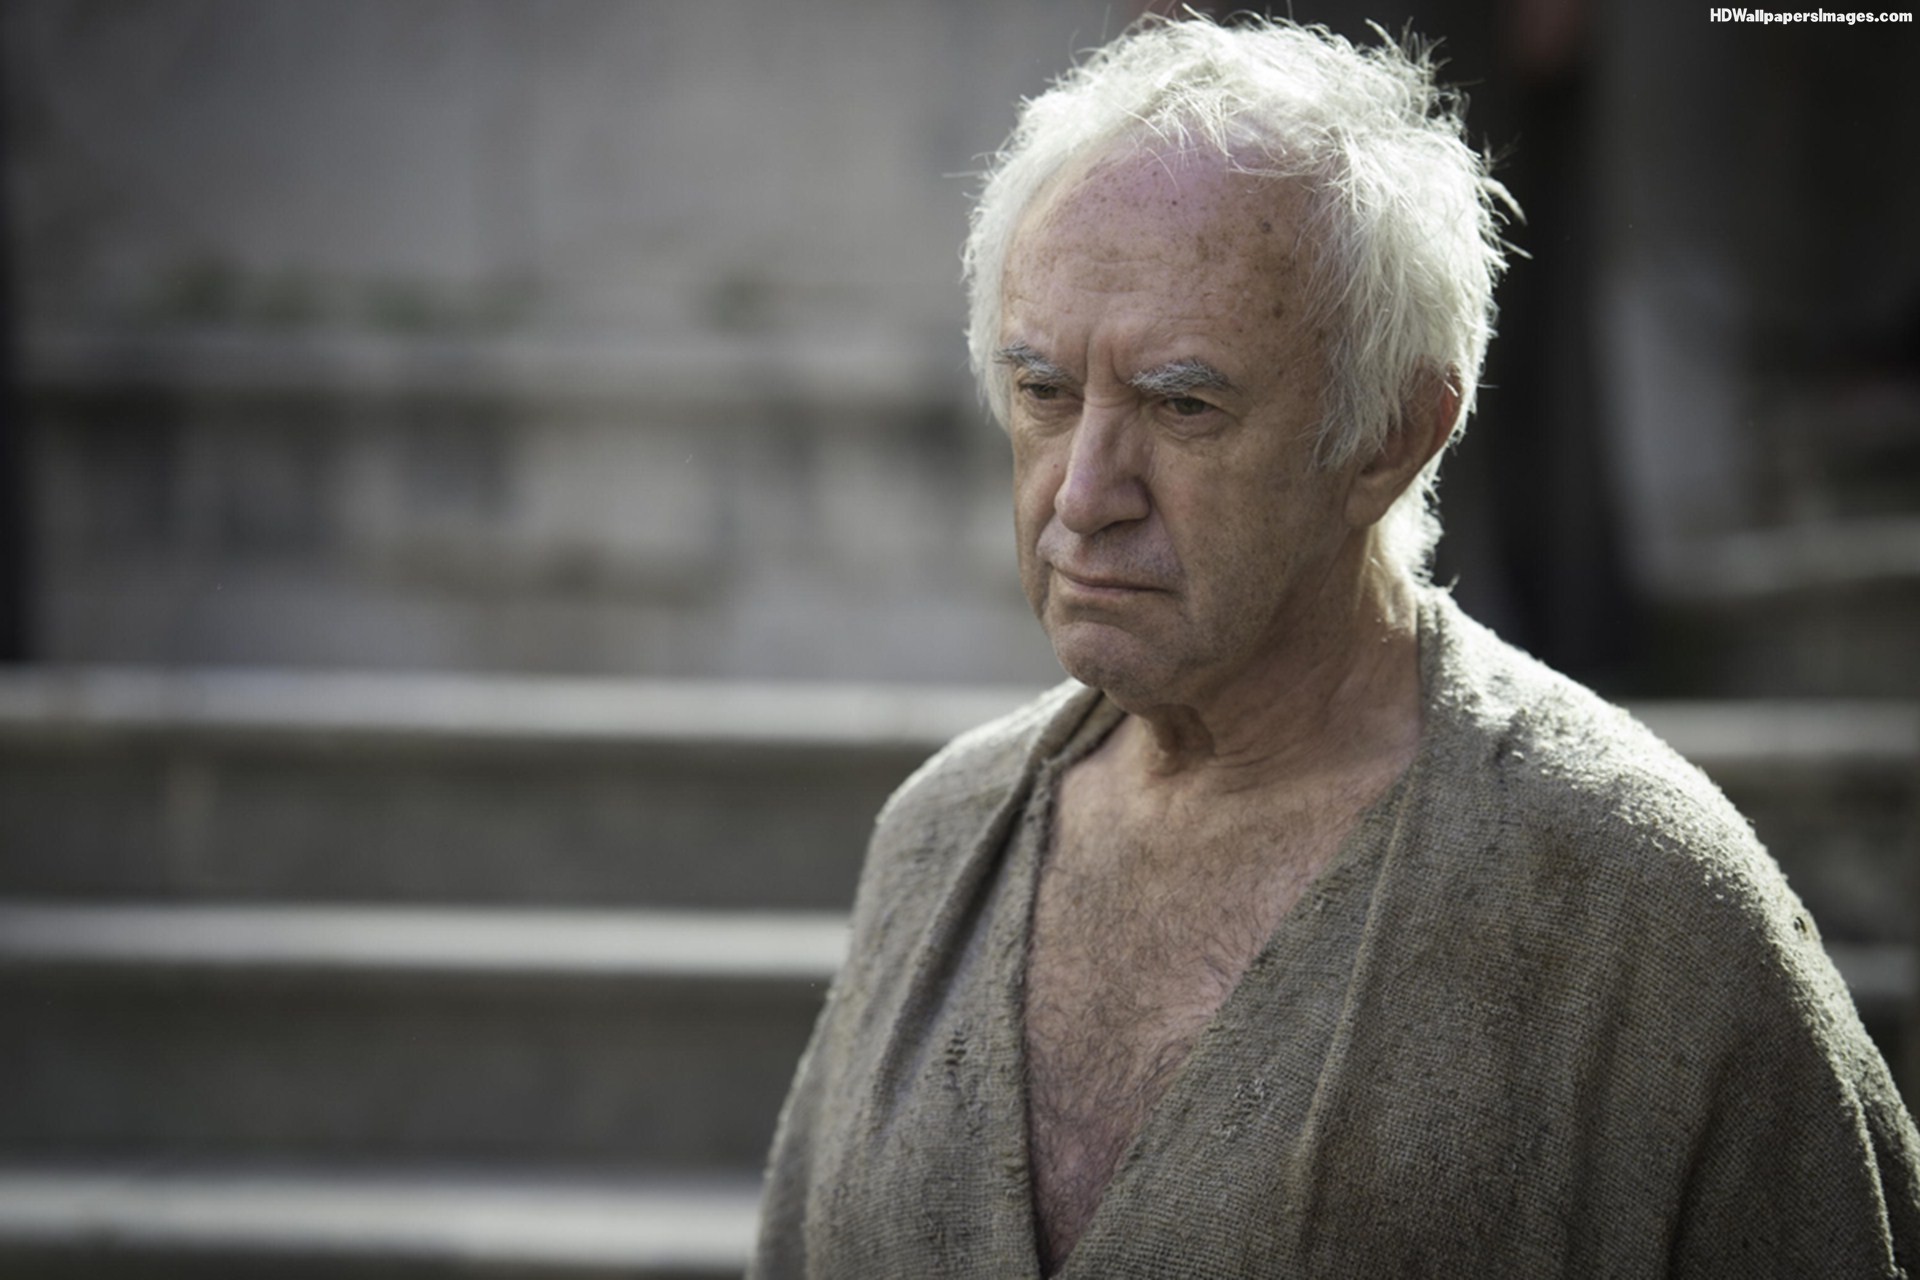 game of thrones - Game of Thrones 5x03 : High Sparrow Game Of Thrones Season 5 Jonathan Pryce As High Sparrow Images